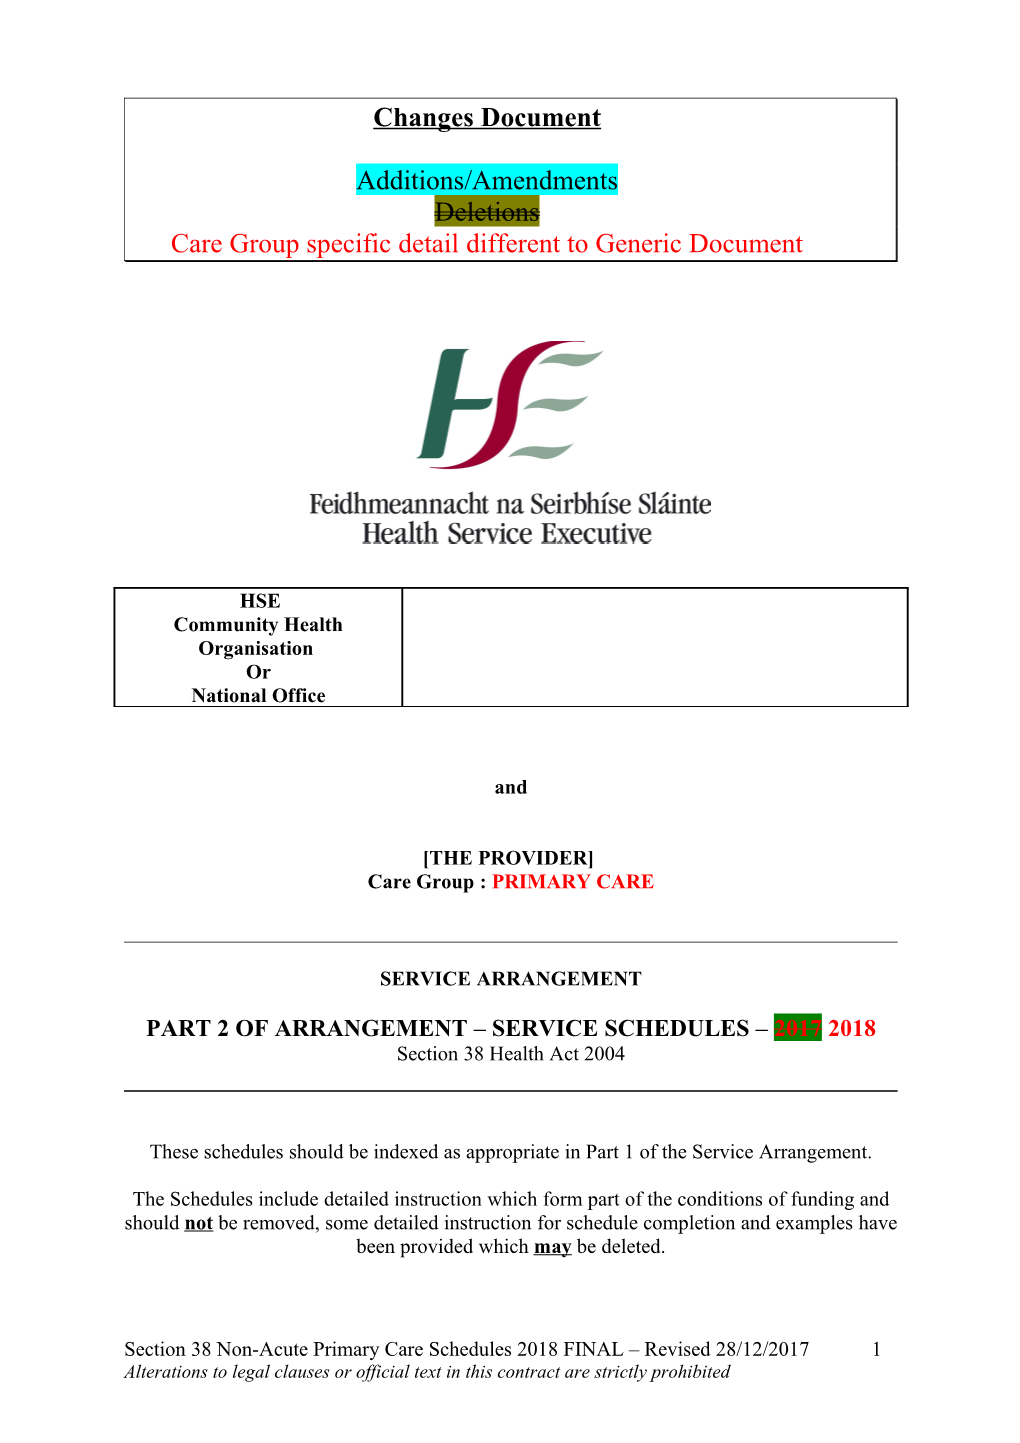 Care Group Specific Detail Different to Generic Document